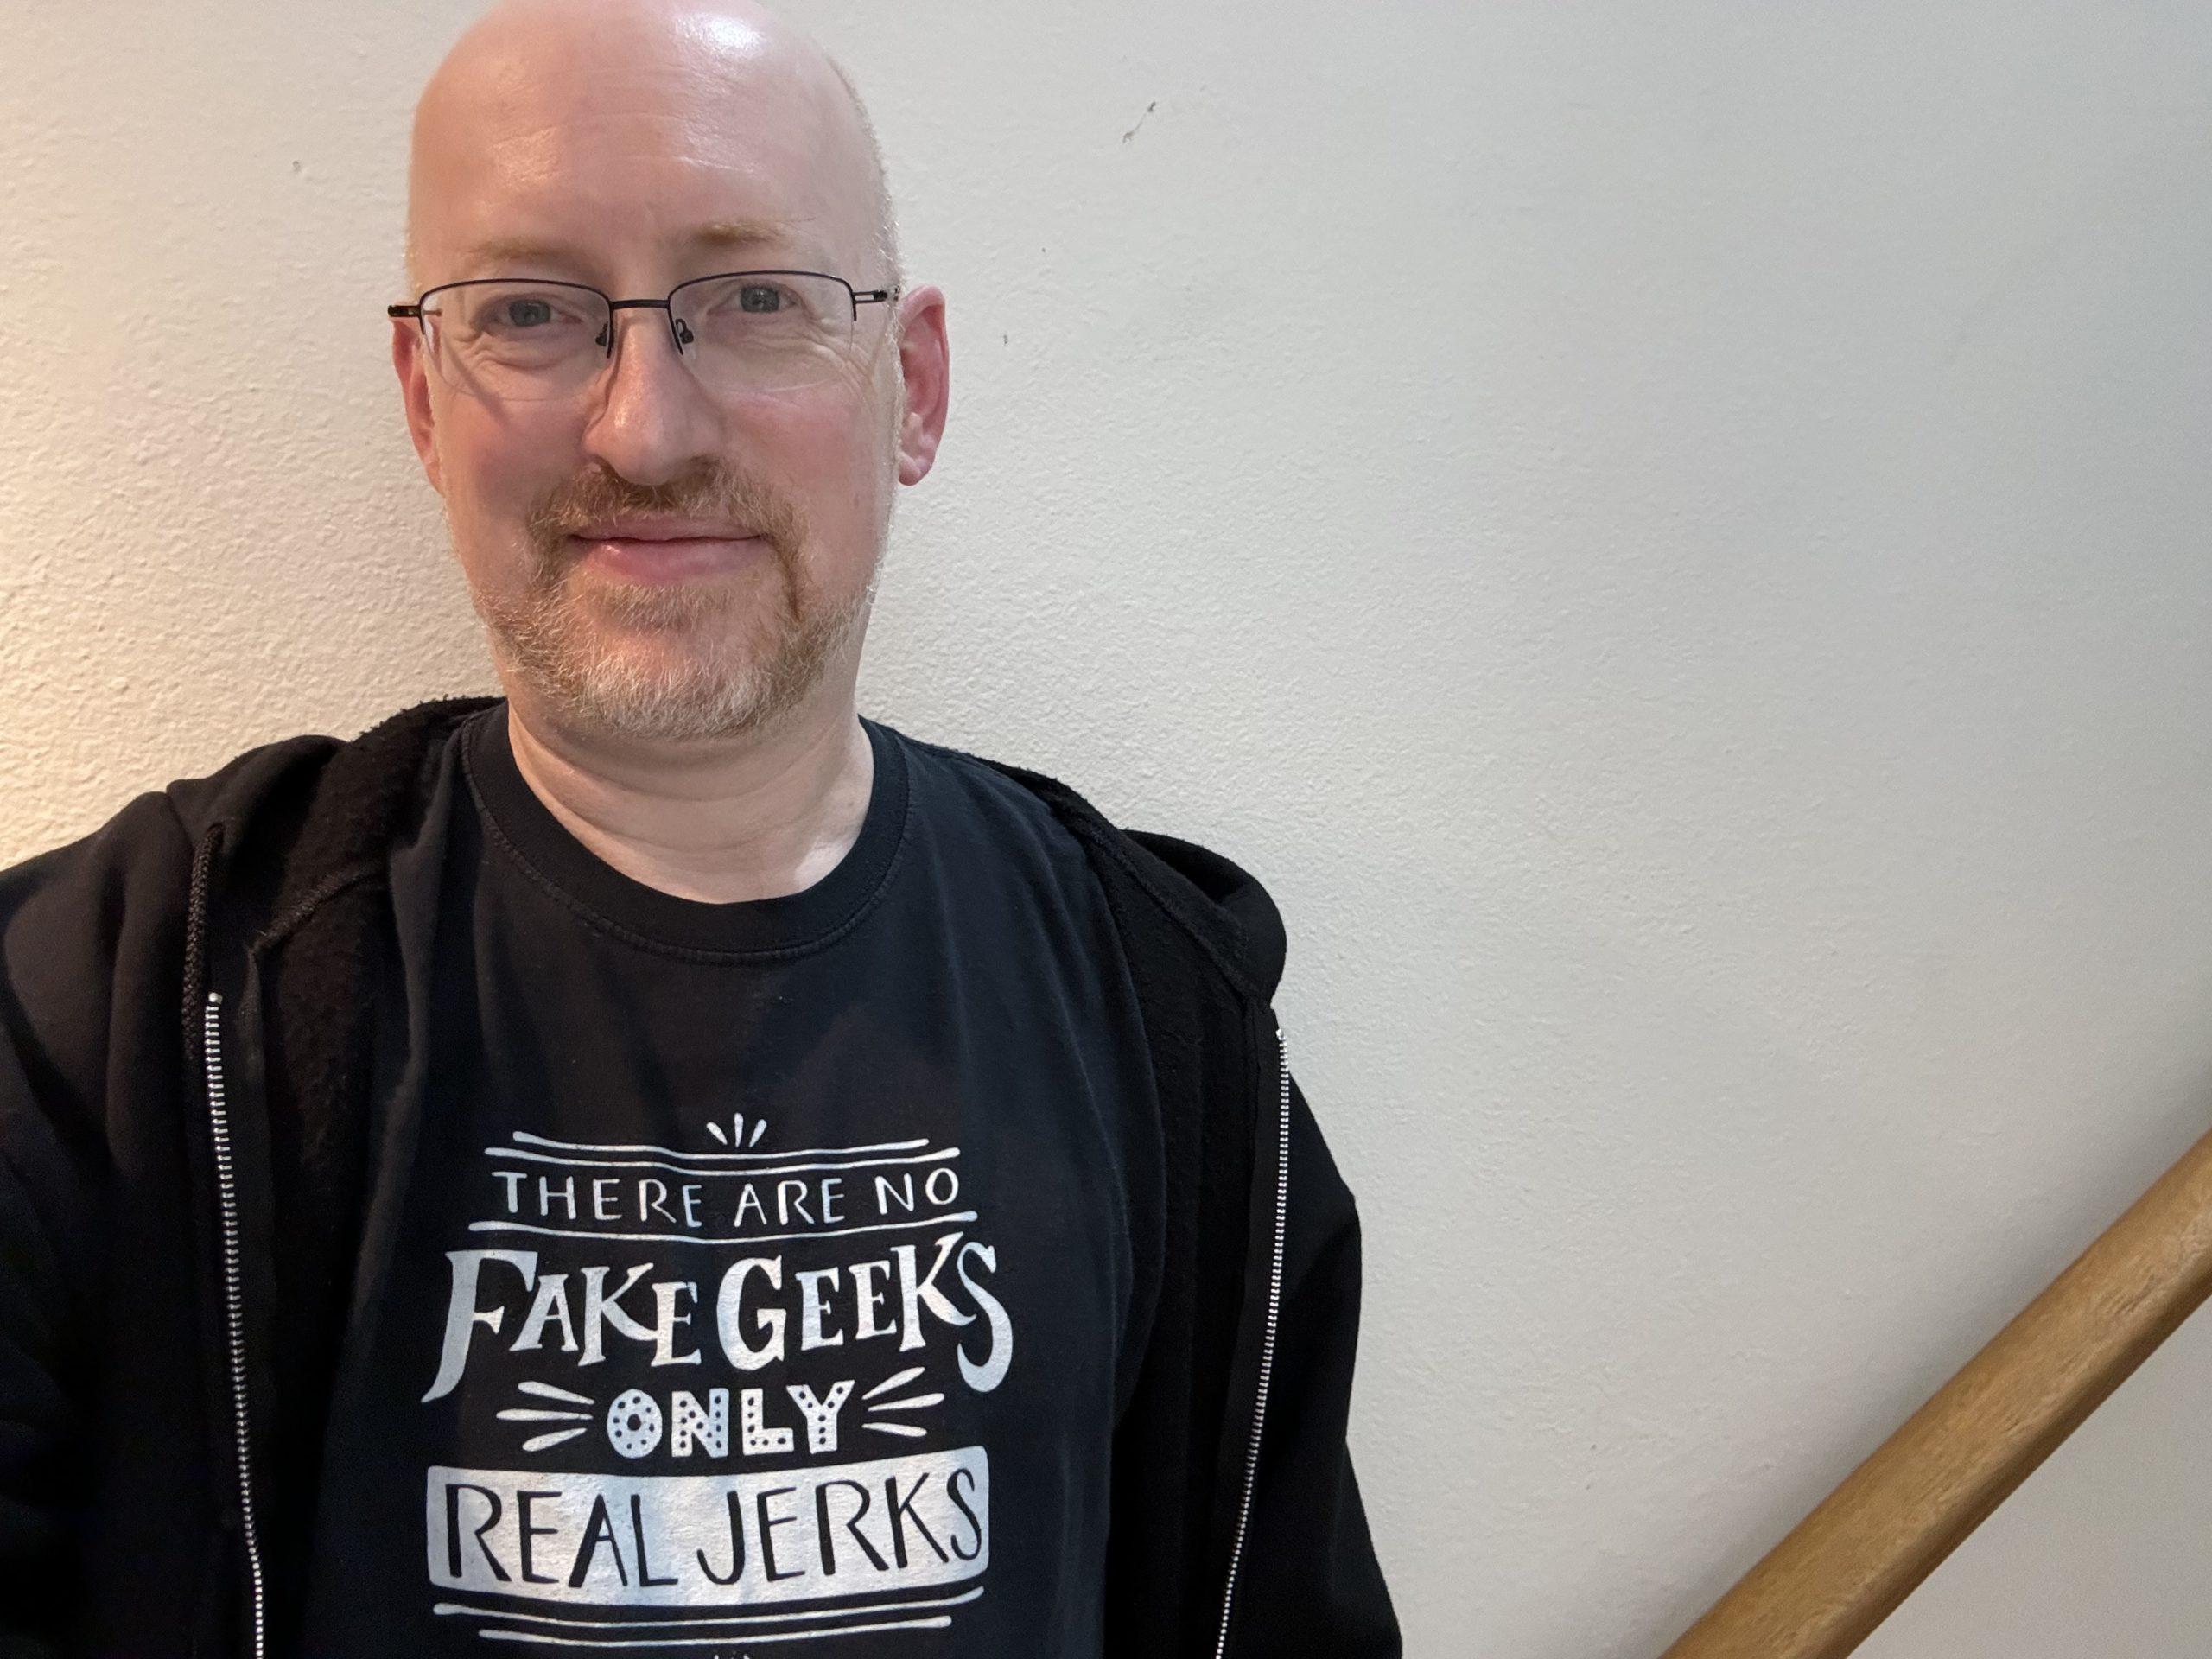 Me against a plain wall, wearing a t-shirt that says 'There are no fake geeks, only real jerks'.